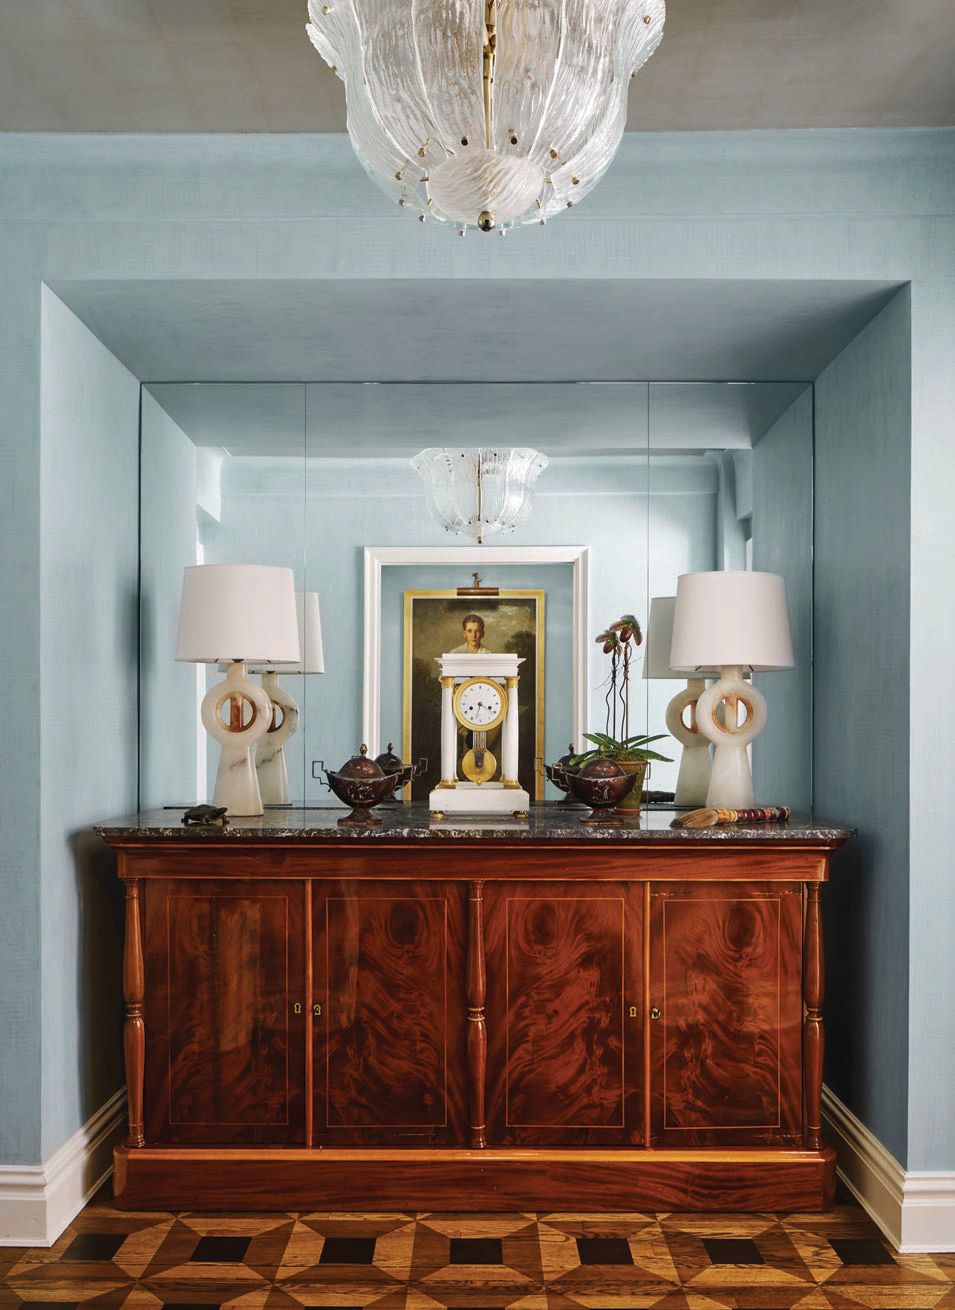 Jewel tones evoke a deco spirit throughout the space. PHOTOGRAPHED BY ANNIE SCHLECTER